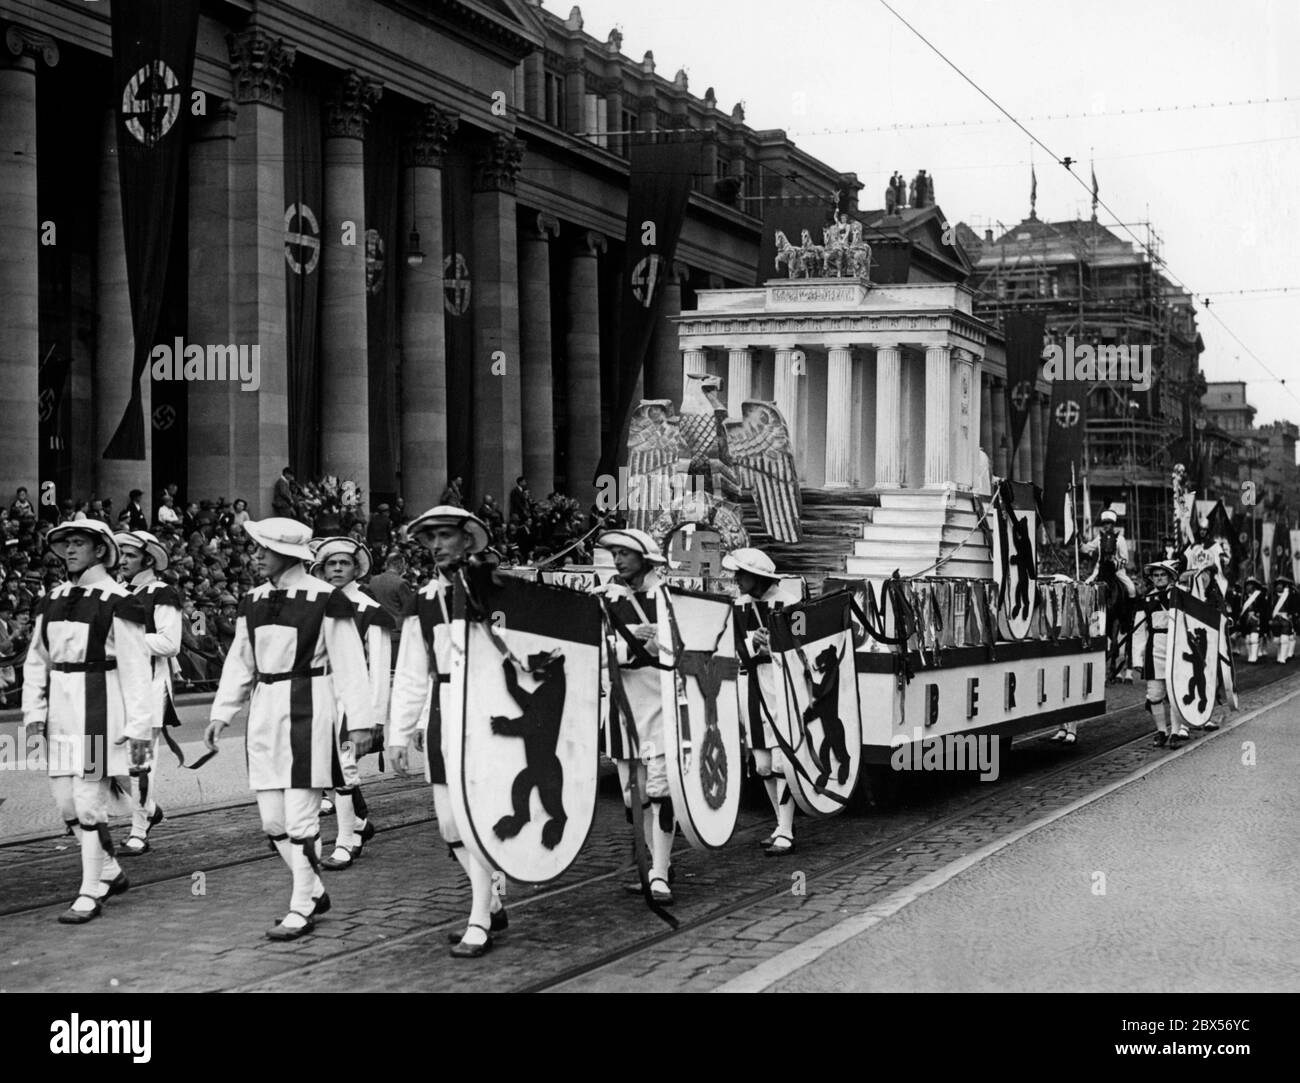 View of the procession on the occasion of the meeting of the foreign organization of the NSDAP in Stuttgart. The picture shows the carriage of the Reich capital Berlin with the Brandenburg Gate, the national coat of arms and the national emblem: imperial eagle with swastika. Stock Photo